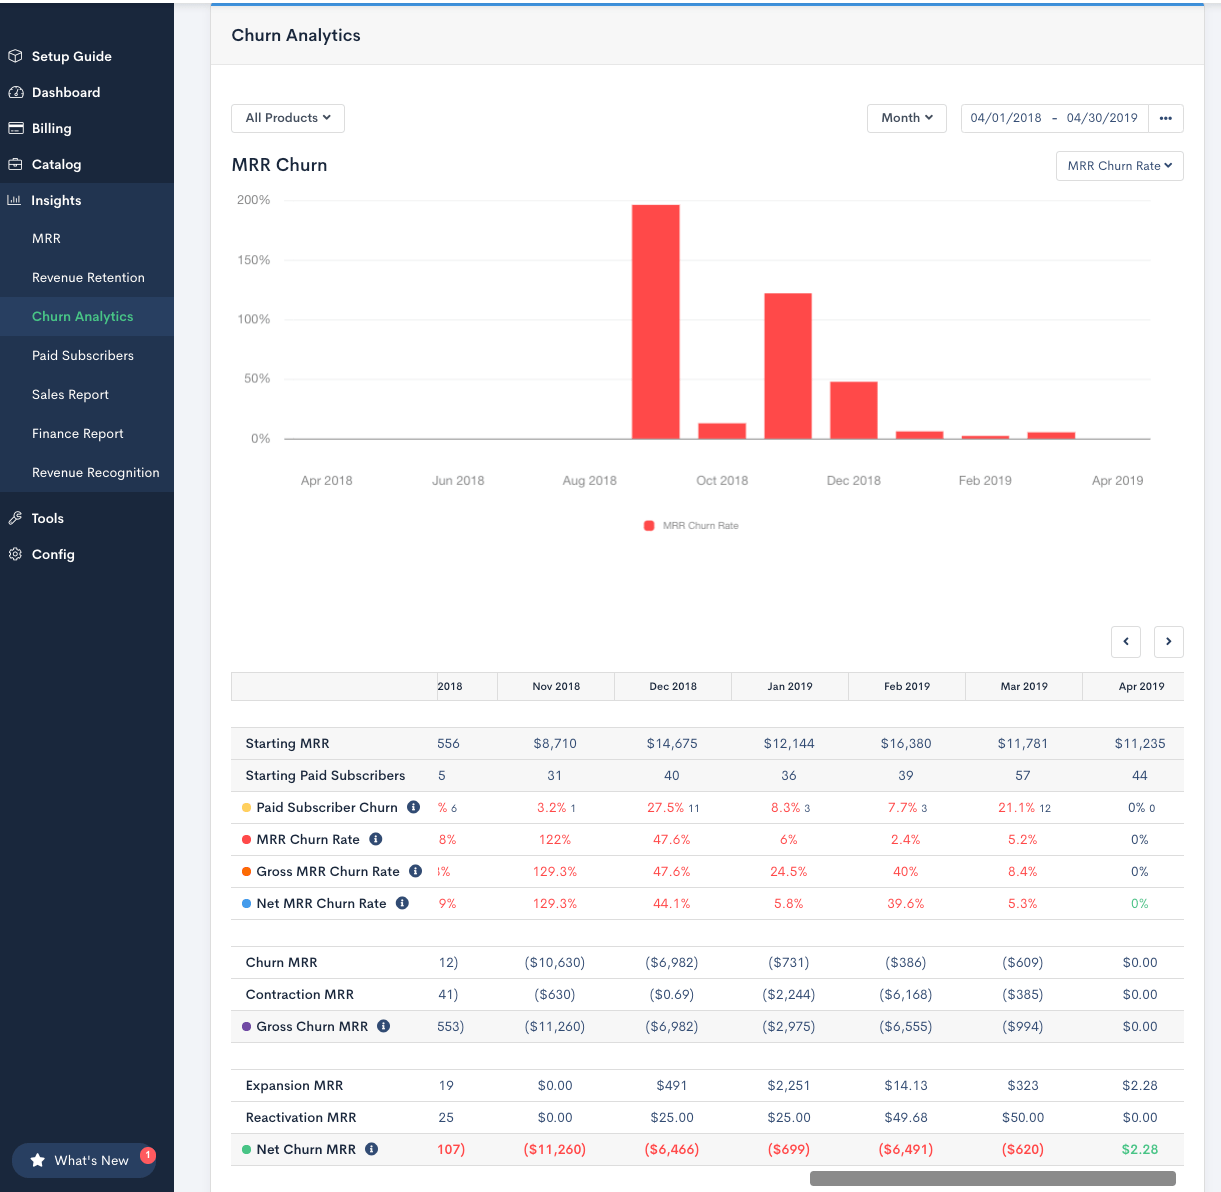 churn-analytics-overview.png